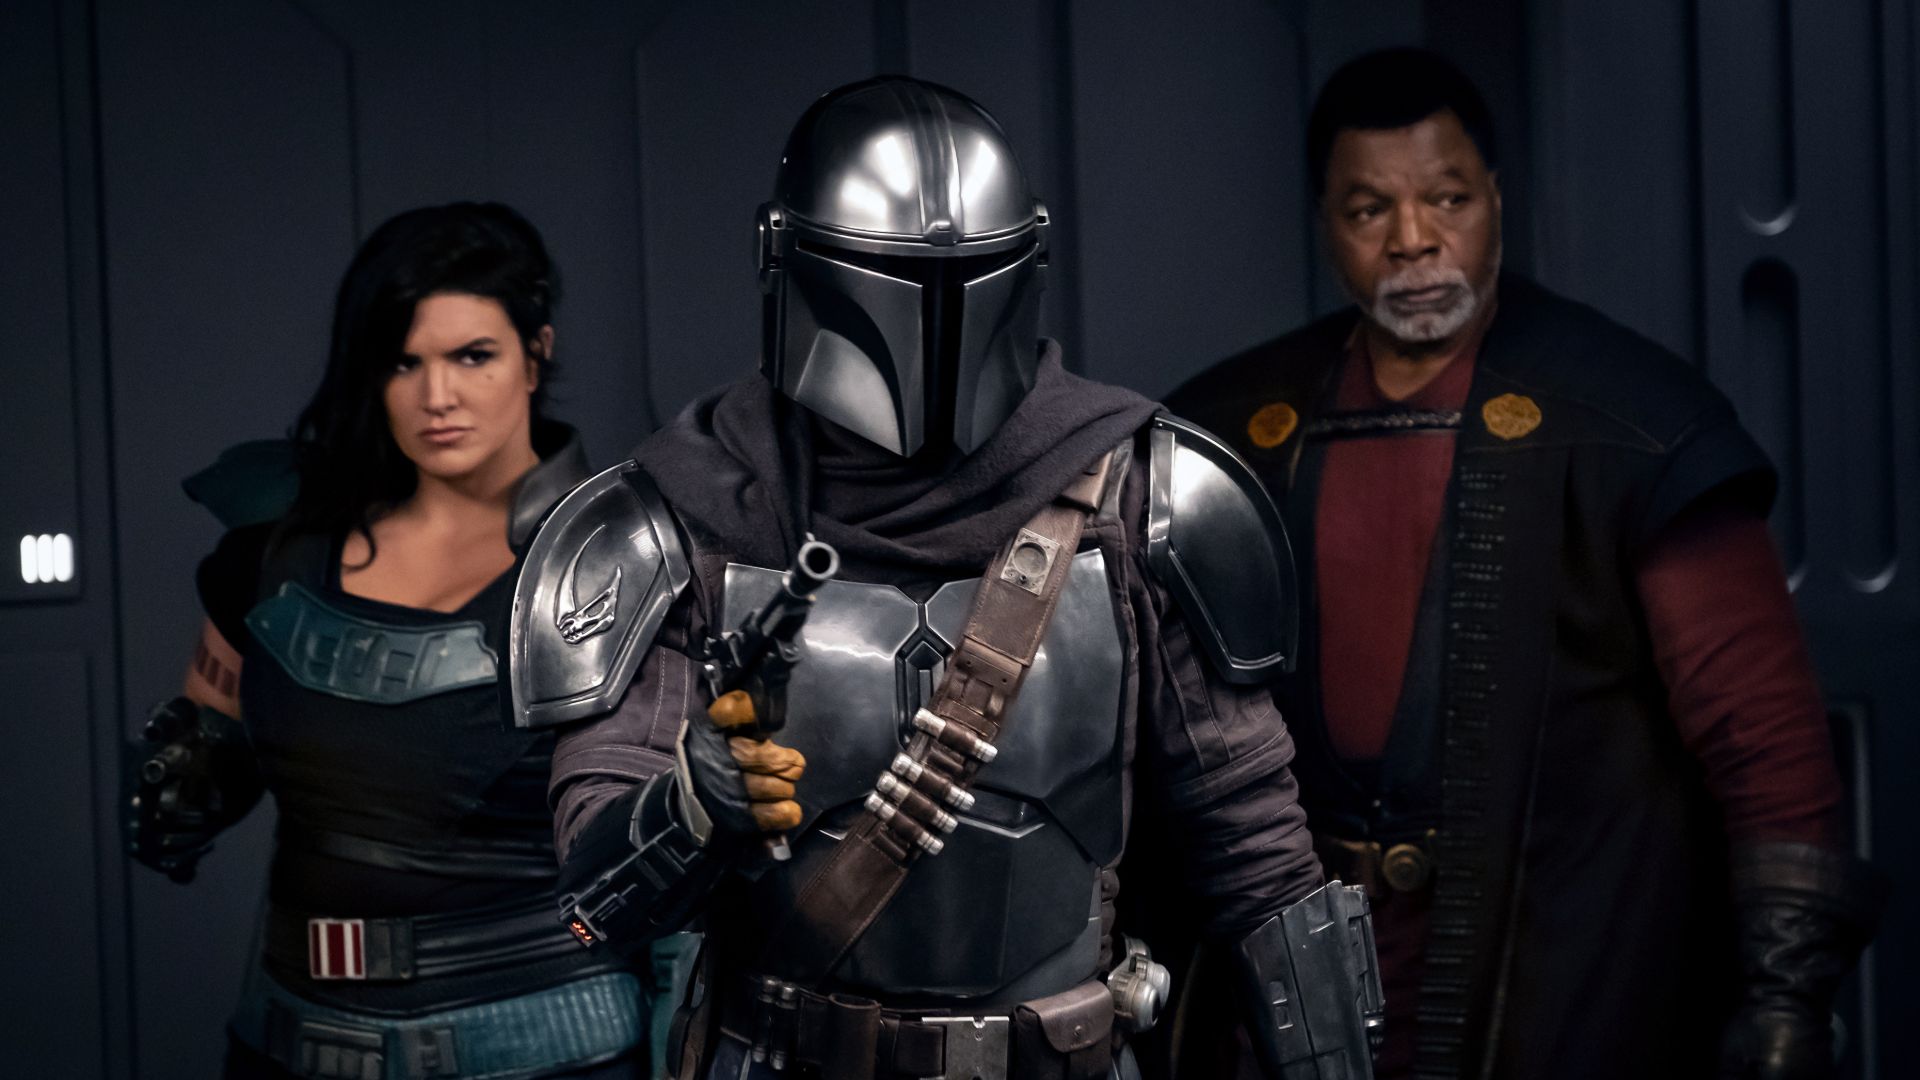 The Mandalorian season 2 image revealed: “Everything gets bigger, the stakes get higher